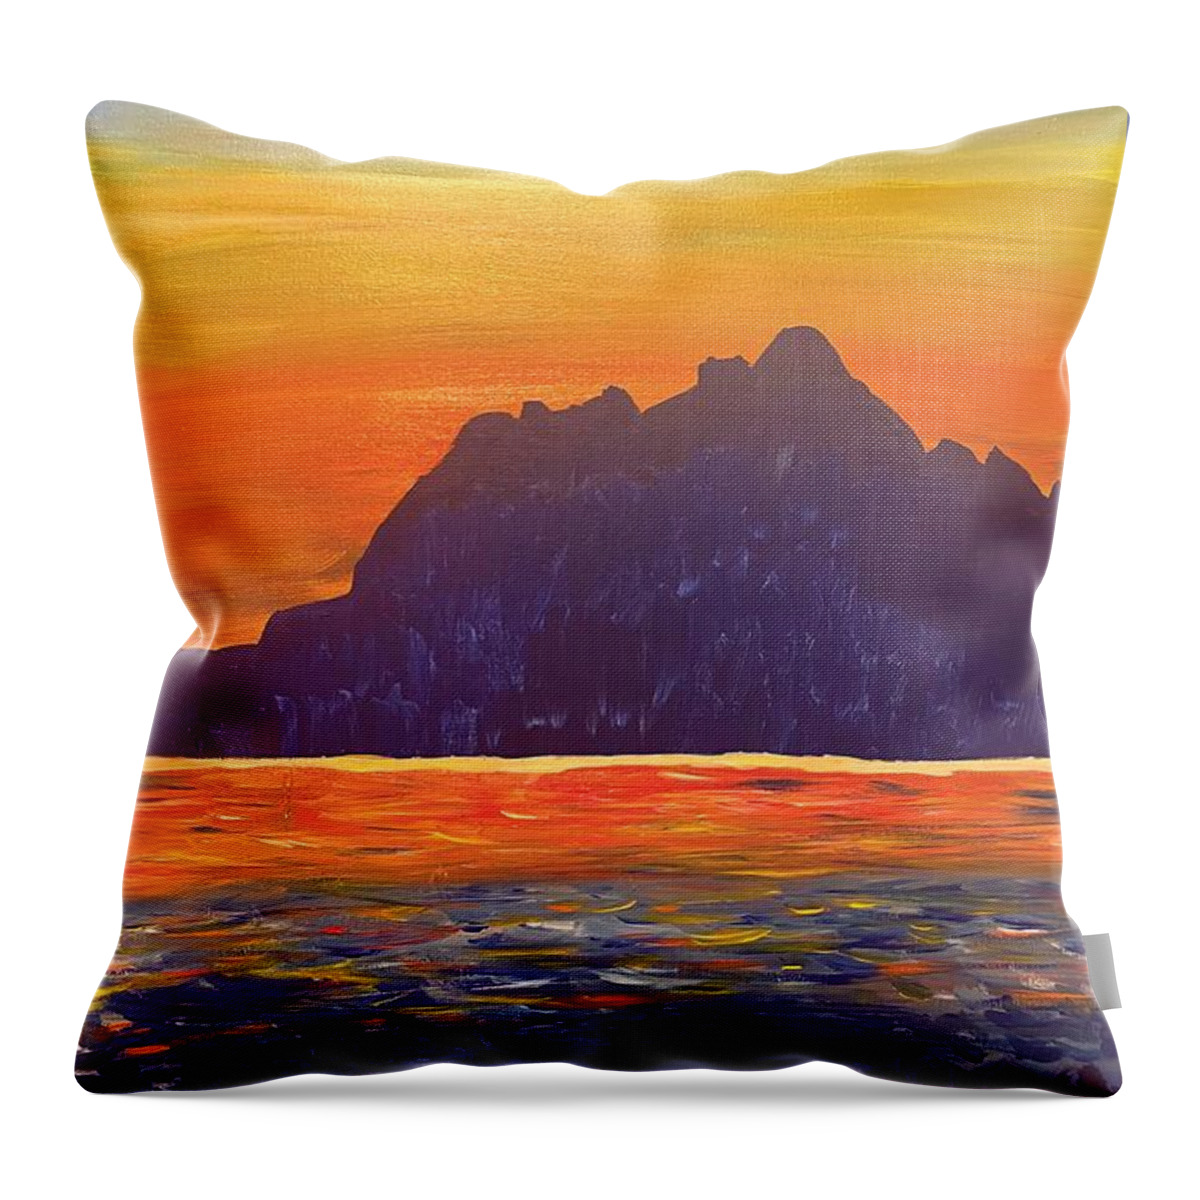 Sunset Throw Pillow featuring the painting Sunset on Abiquiu Lake by Christina Wedberg